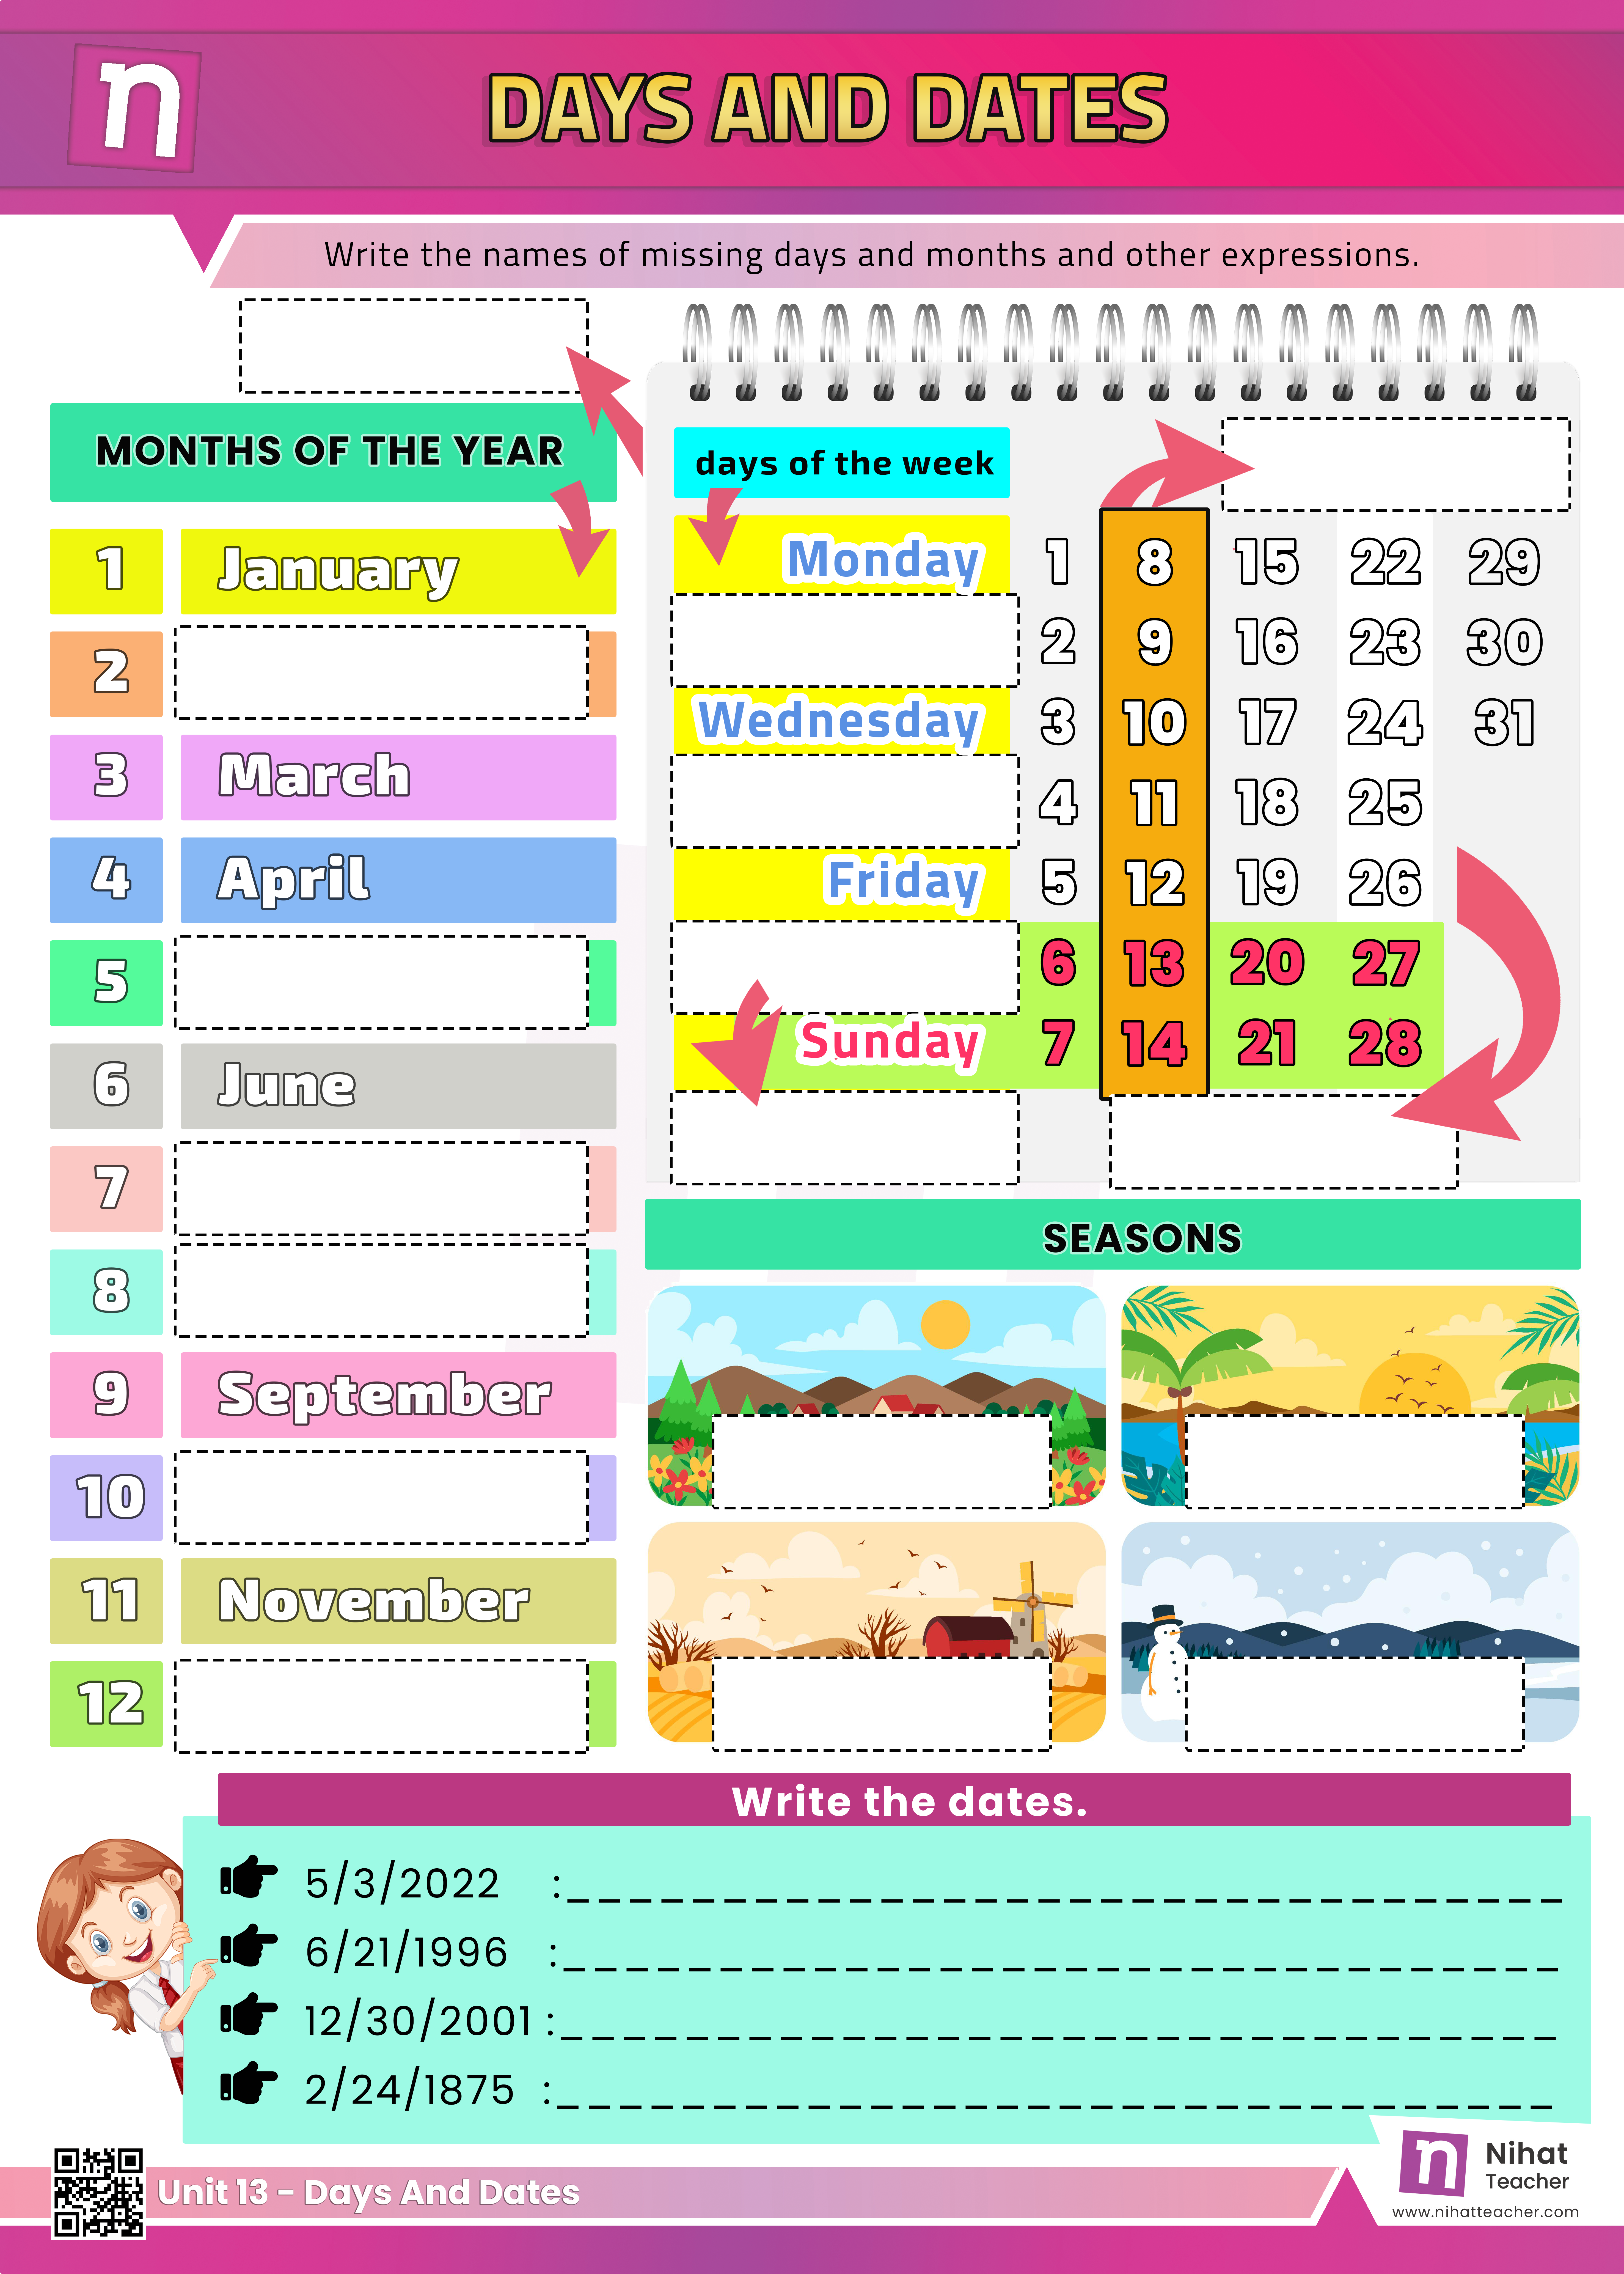 How to read dates in English?   Practise English Vocabulary. A worksheet test about days, months, seasons and dates in English.   Click here to download a printable PDF worksheet about days, months, seasons and dates in English.   Search this site to find more about days, months, seasons and dates in English.